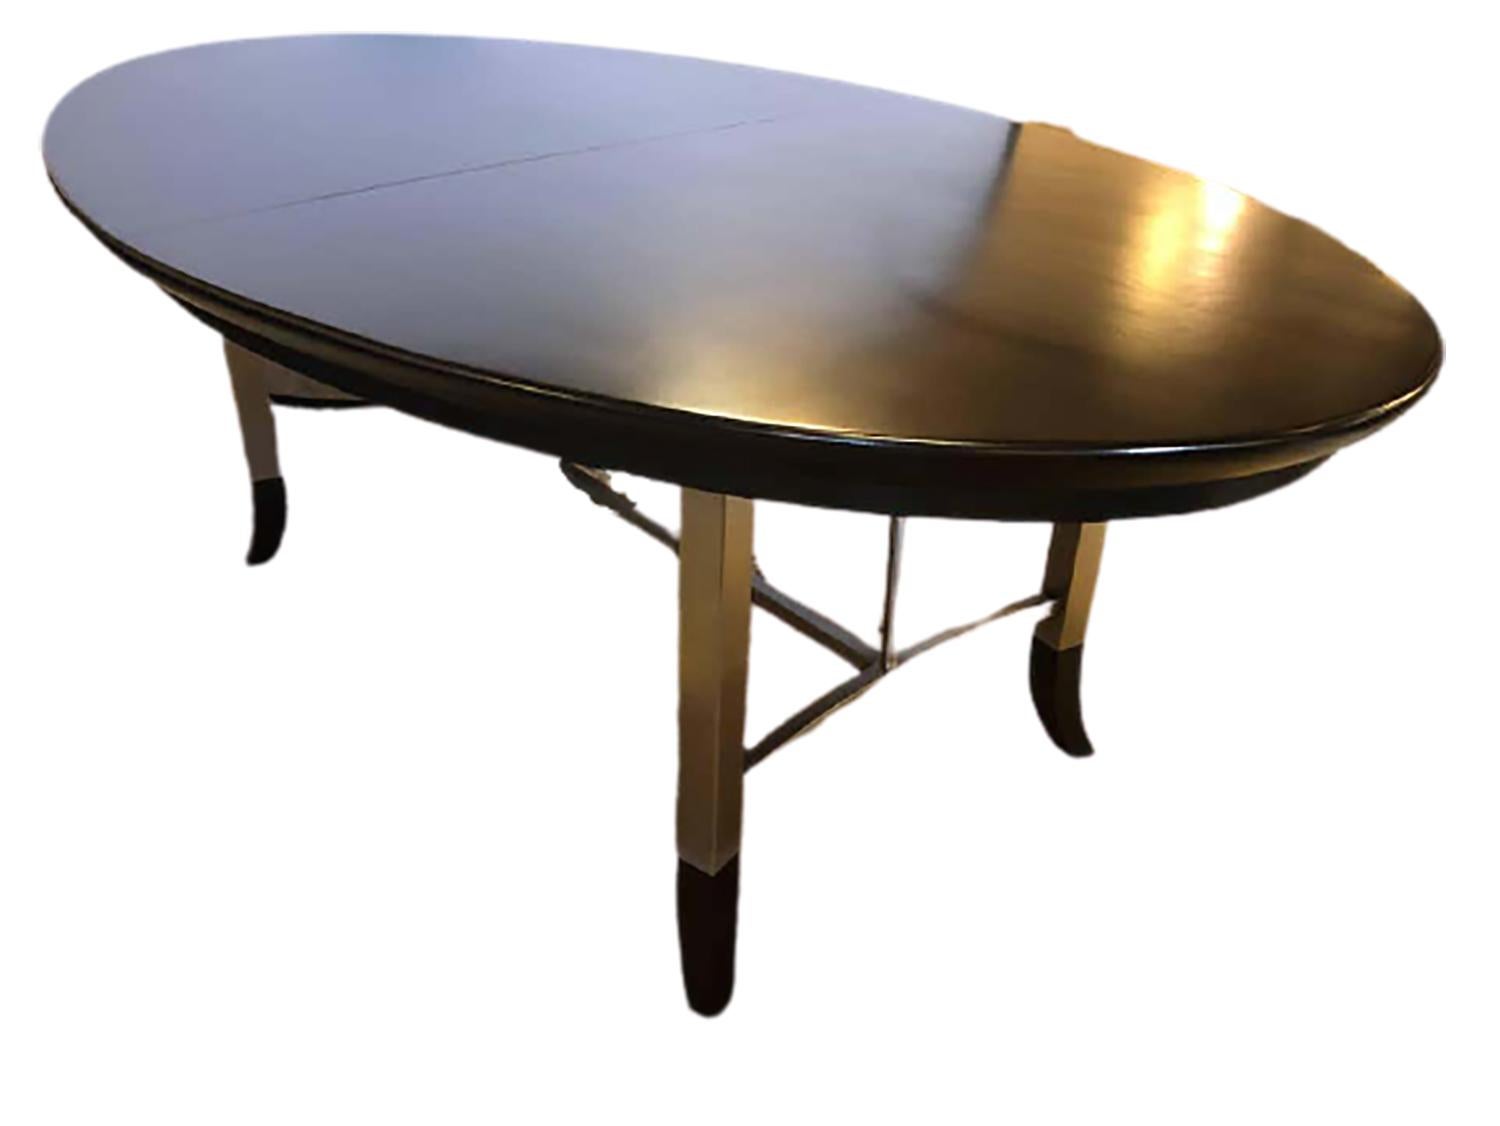 Custom-made modern steel and ebonized oval design dining table with matching ebonized sabots. Part of our extensive collection of over forty dining tables and chair sets as seen on this site, thus why we are referred to as the King of Dining